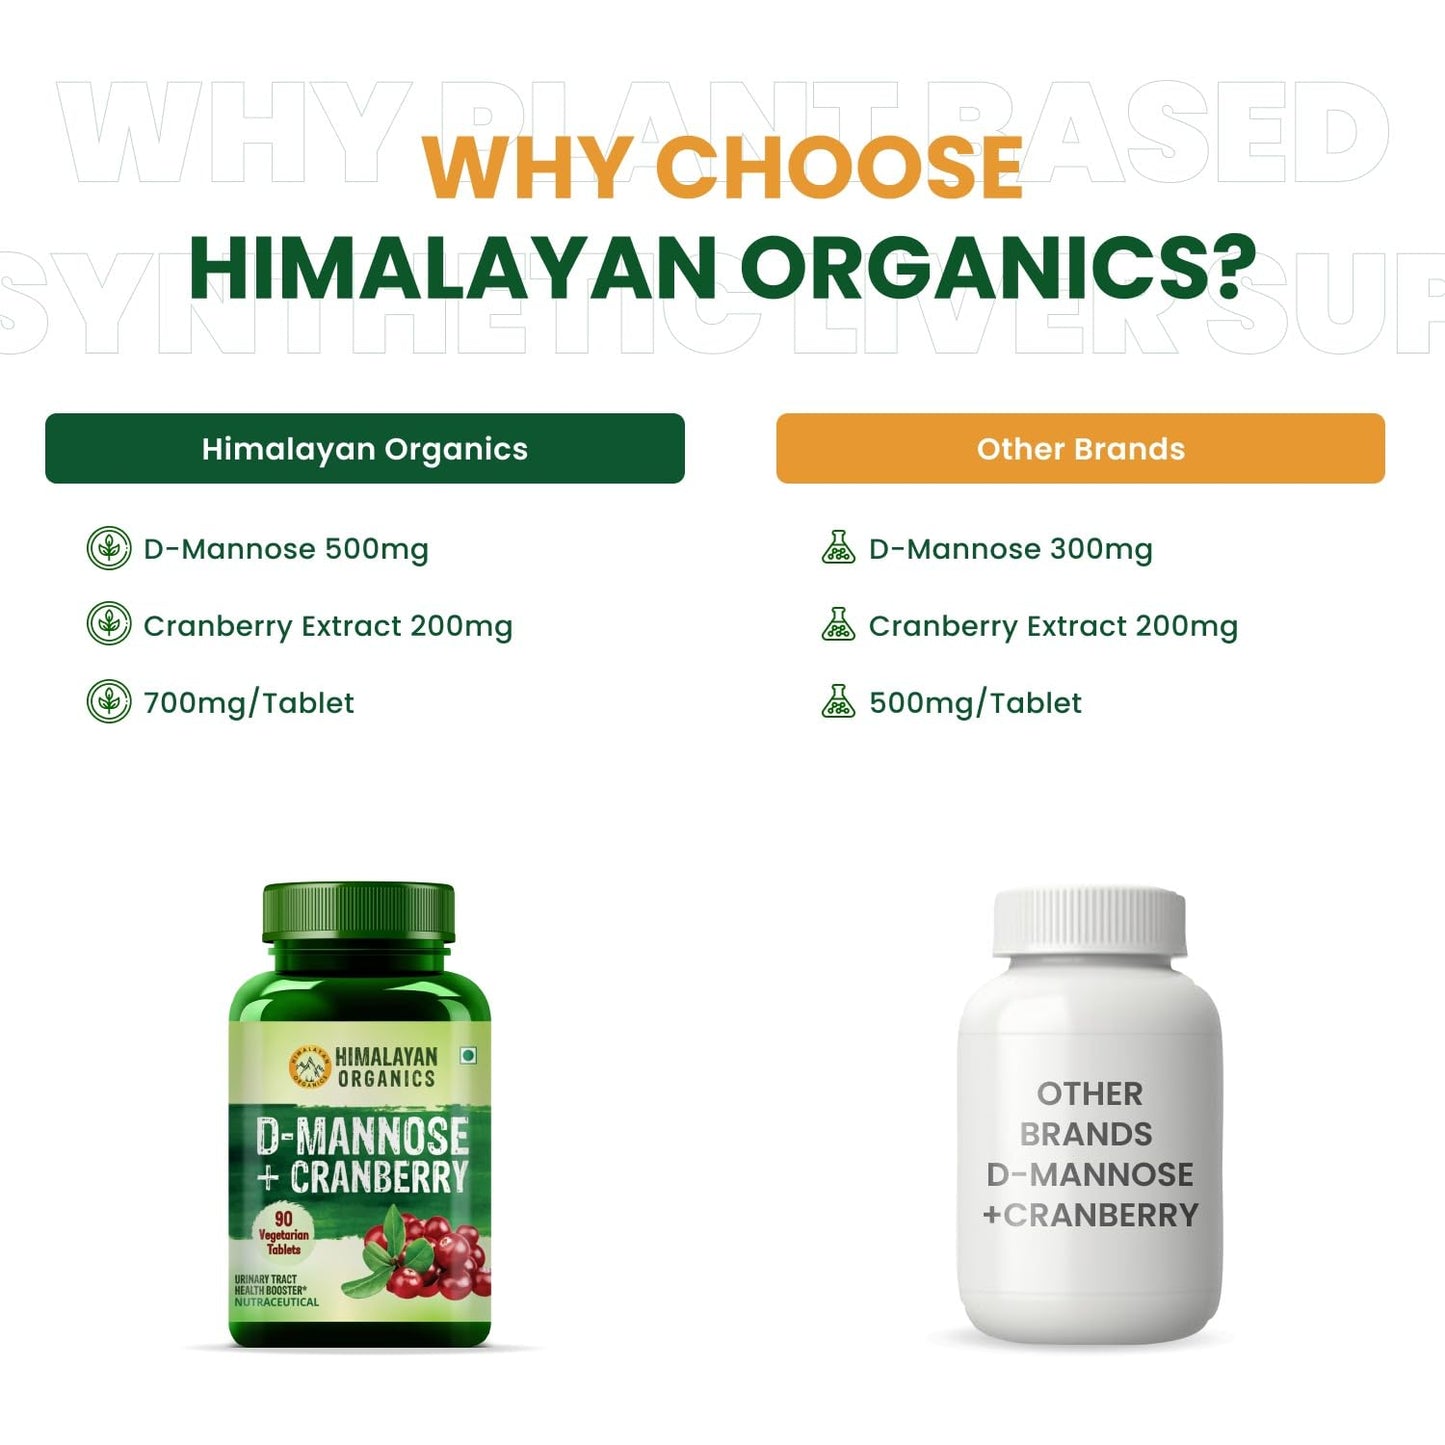 Himalayan Organics D-MANNOSE + CRANBERRY Antioxidant Rich Supplement for Kidney Health & Urinary Tract Infection - 90 Tablets